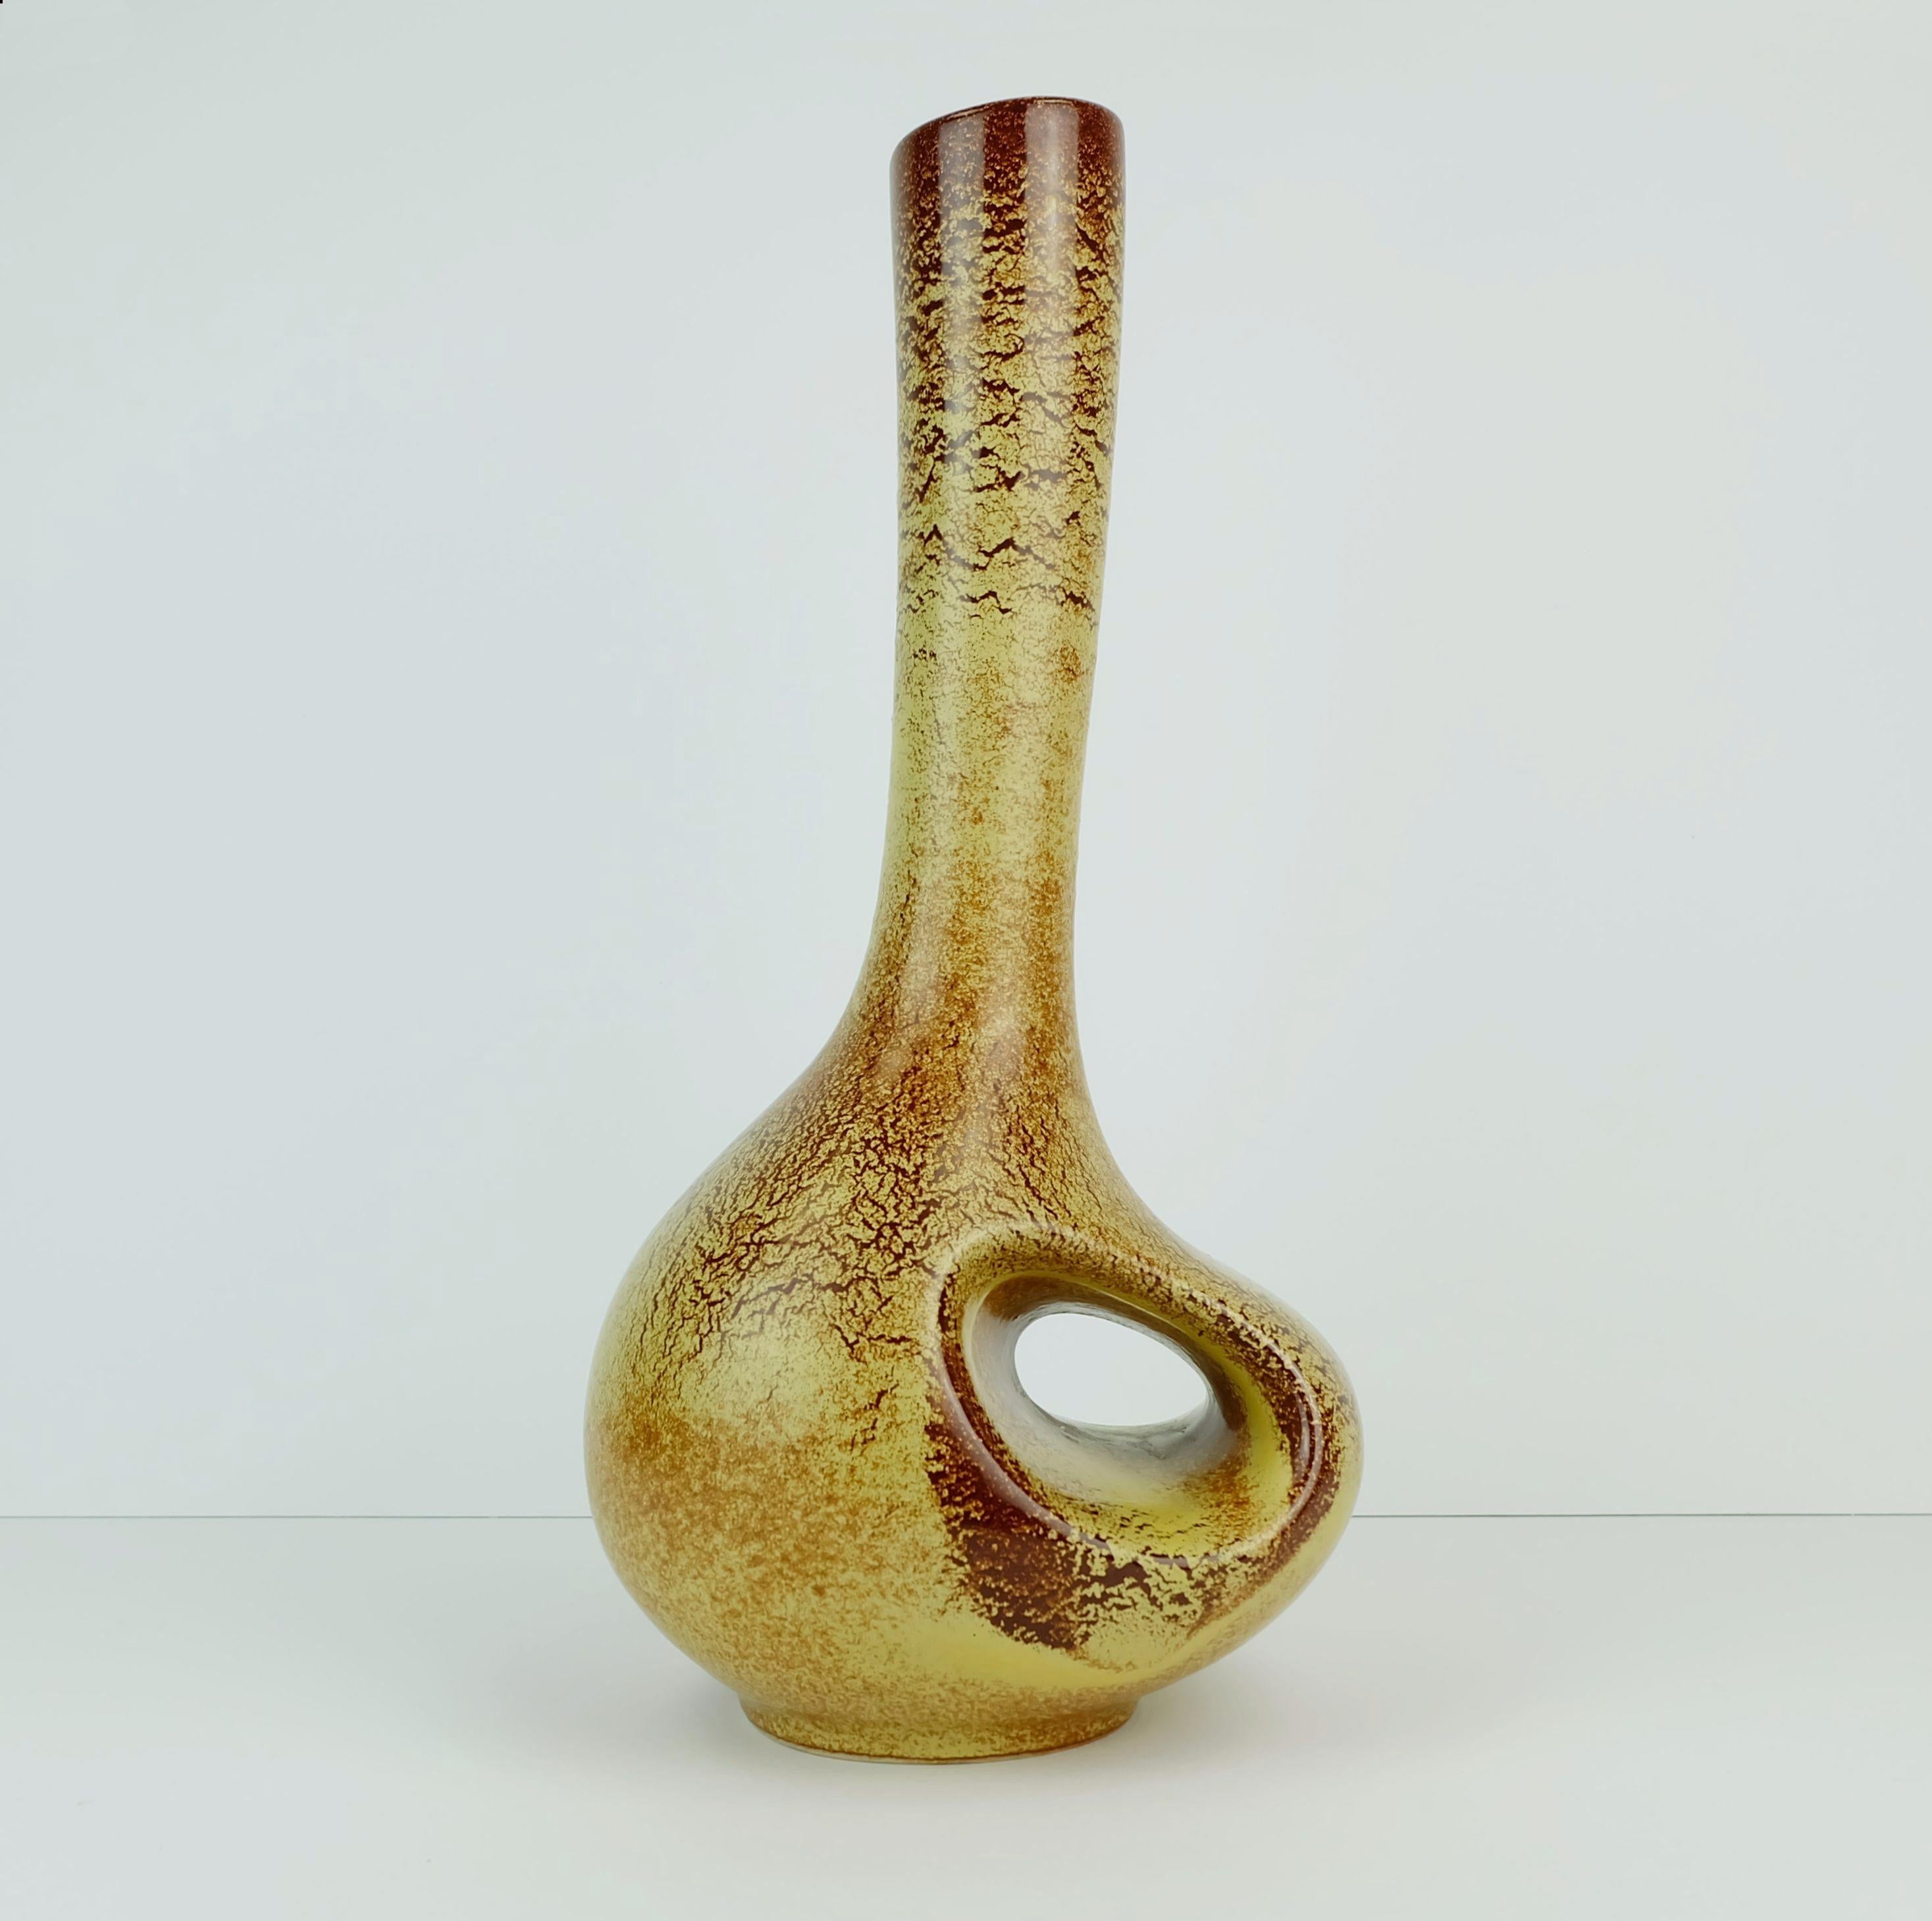 Fantastic Italian mid century ceramic vase. Designed by Roberto Rigon for Bertoncello. Beautiful sculptural shape, glaze in different shades of light brown and russet.

Height 13.77